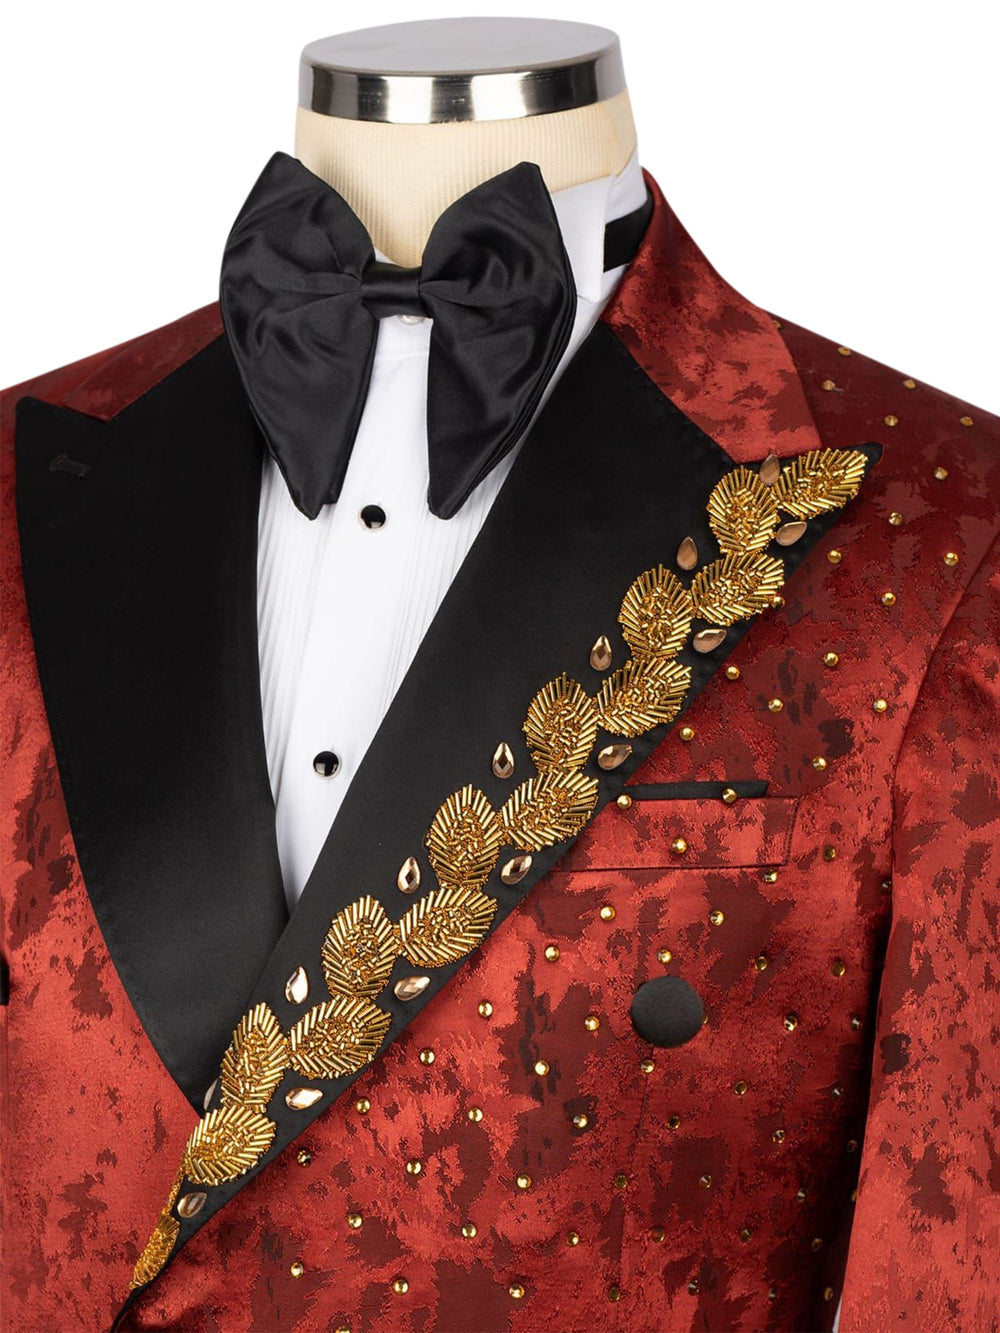 Mens Double Breasted Peak Lapel Two Piece Tuxedo in Red and Black Embellished with Gold Leaves